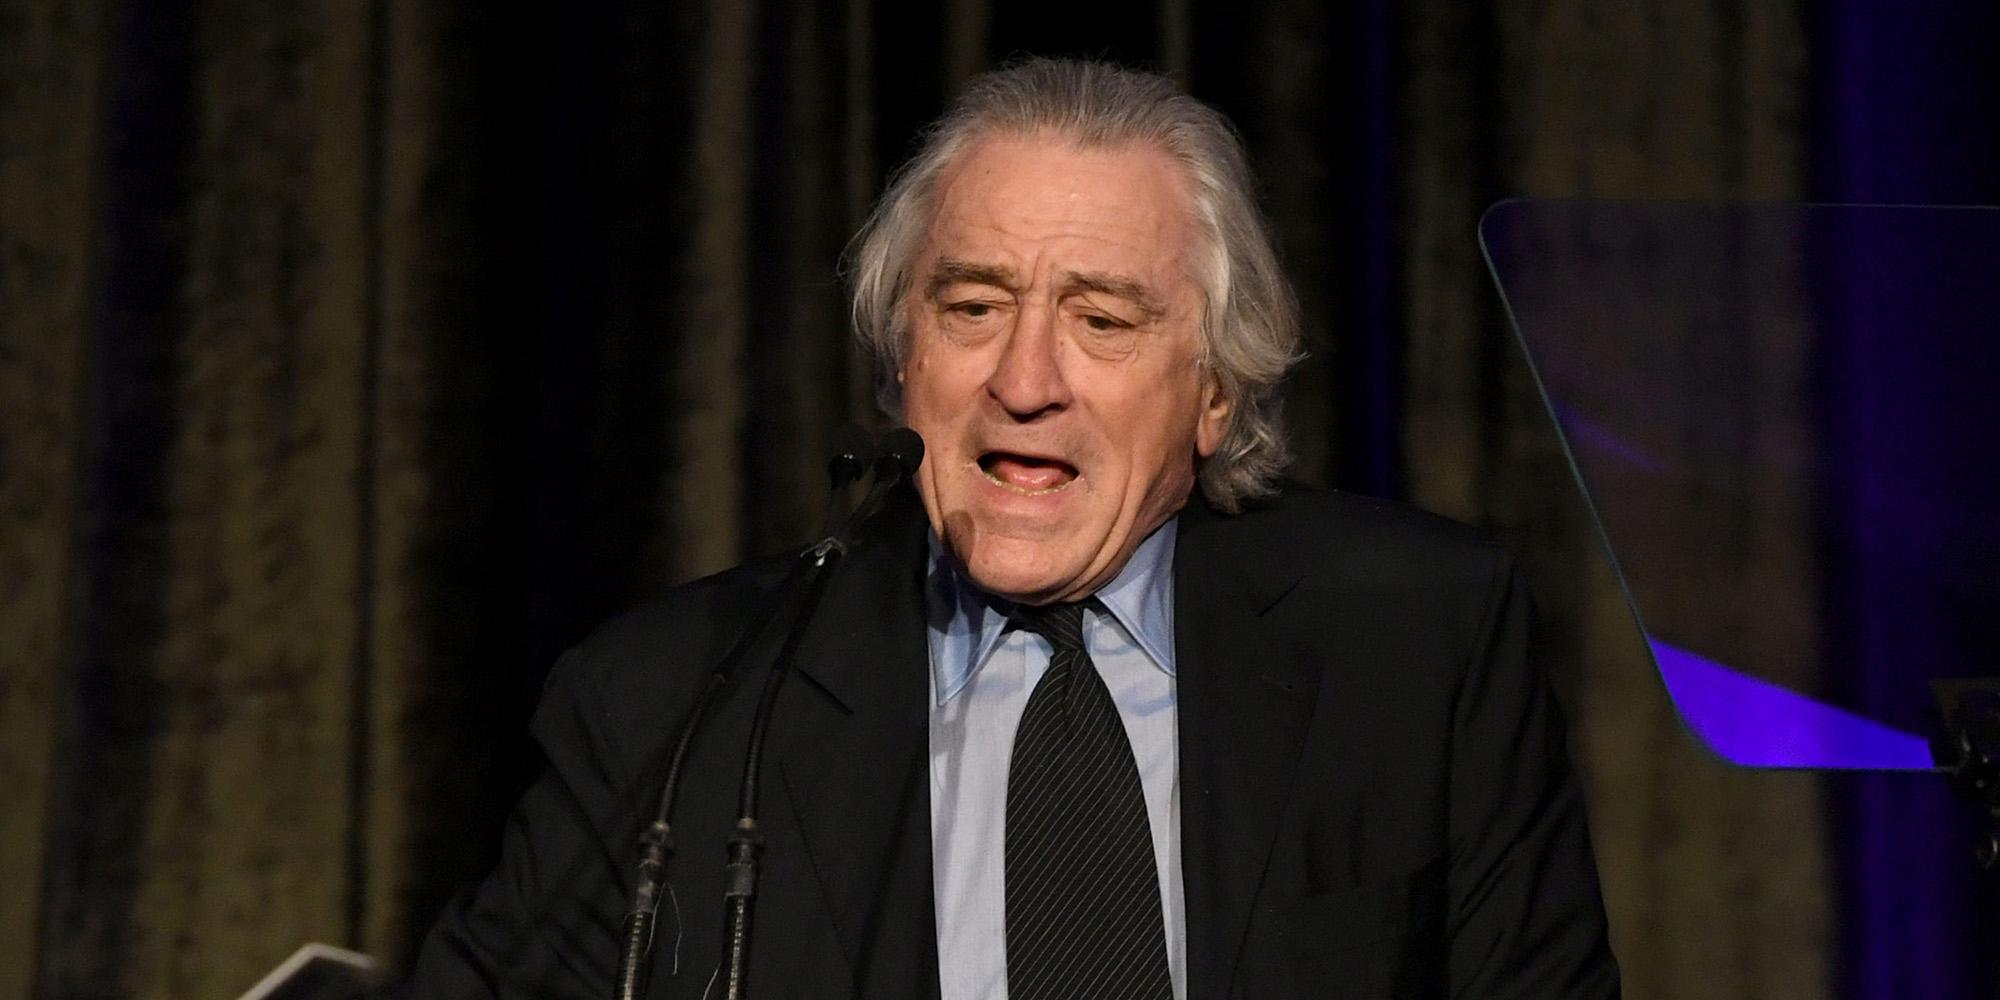 Robert De Niro speaks onstage at the American Icon Awards at the Beverly Wilshire Four Seasons Hotel on May 19, 2019 in Beverly Hills, California